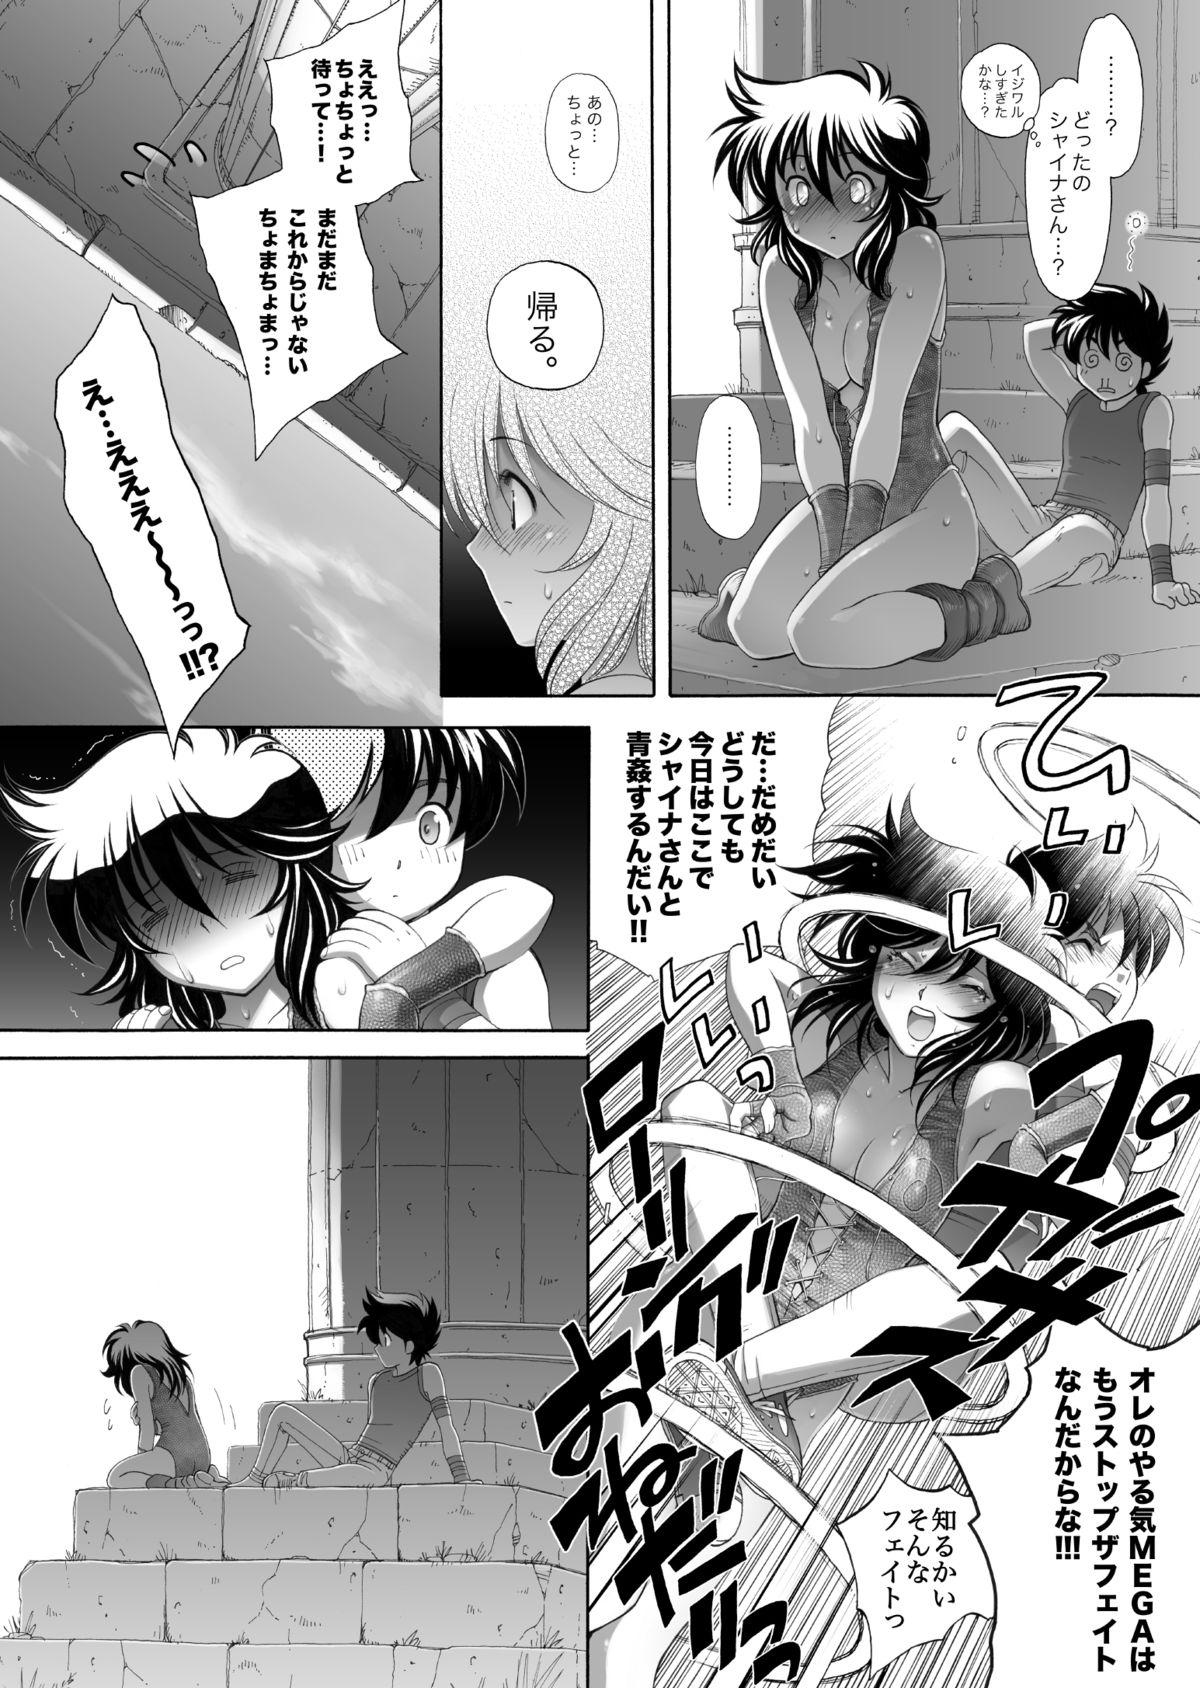 Fuck S.I.S.I.O.K.N.M.A. II - Saint seiya Point Of View - Page 11